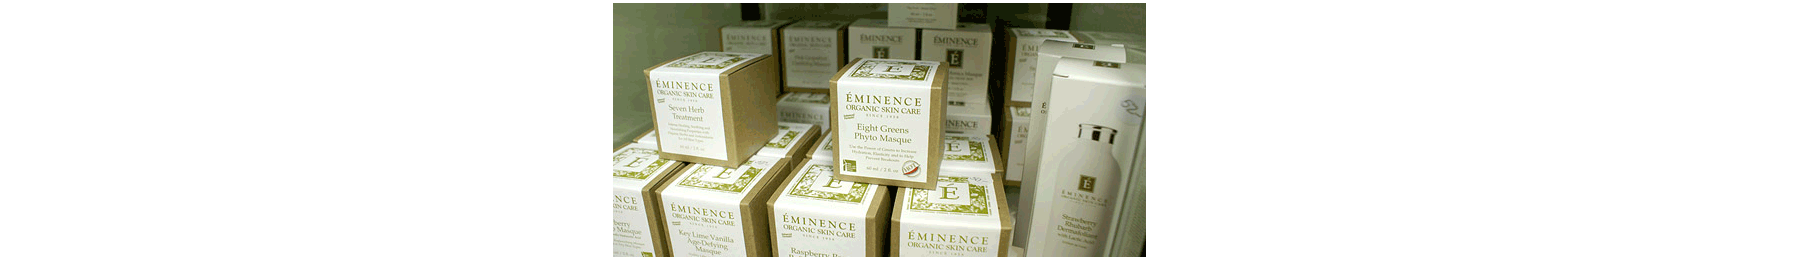 Eminence Organic Skin Care Products